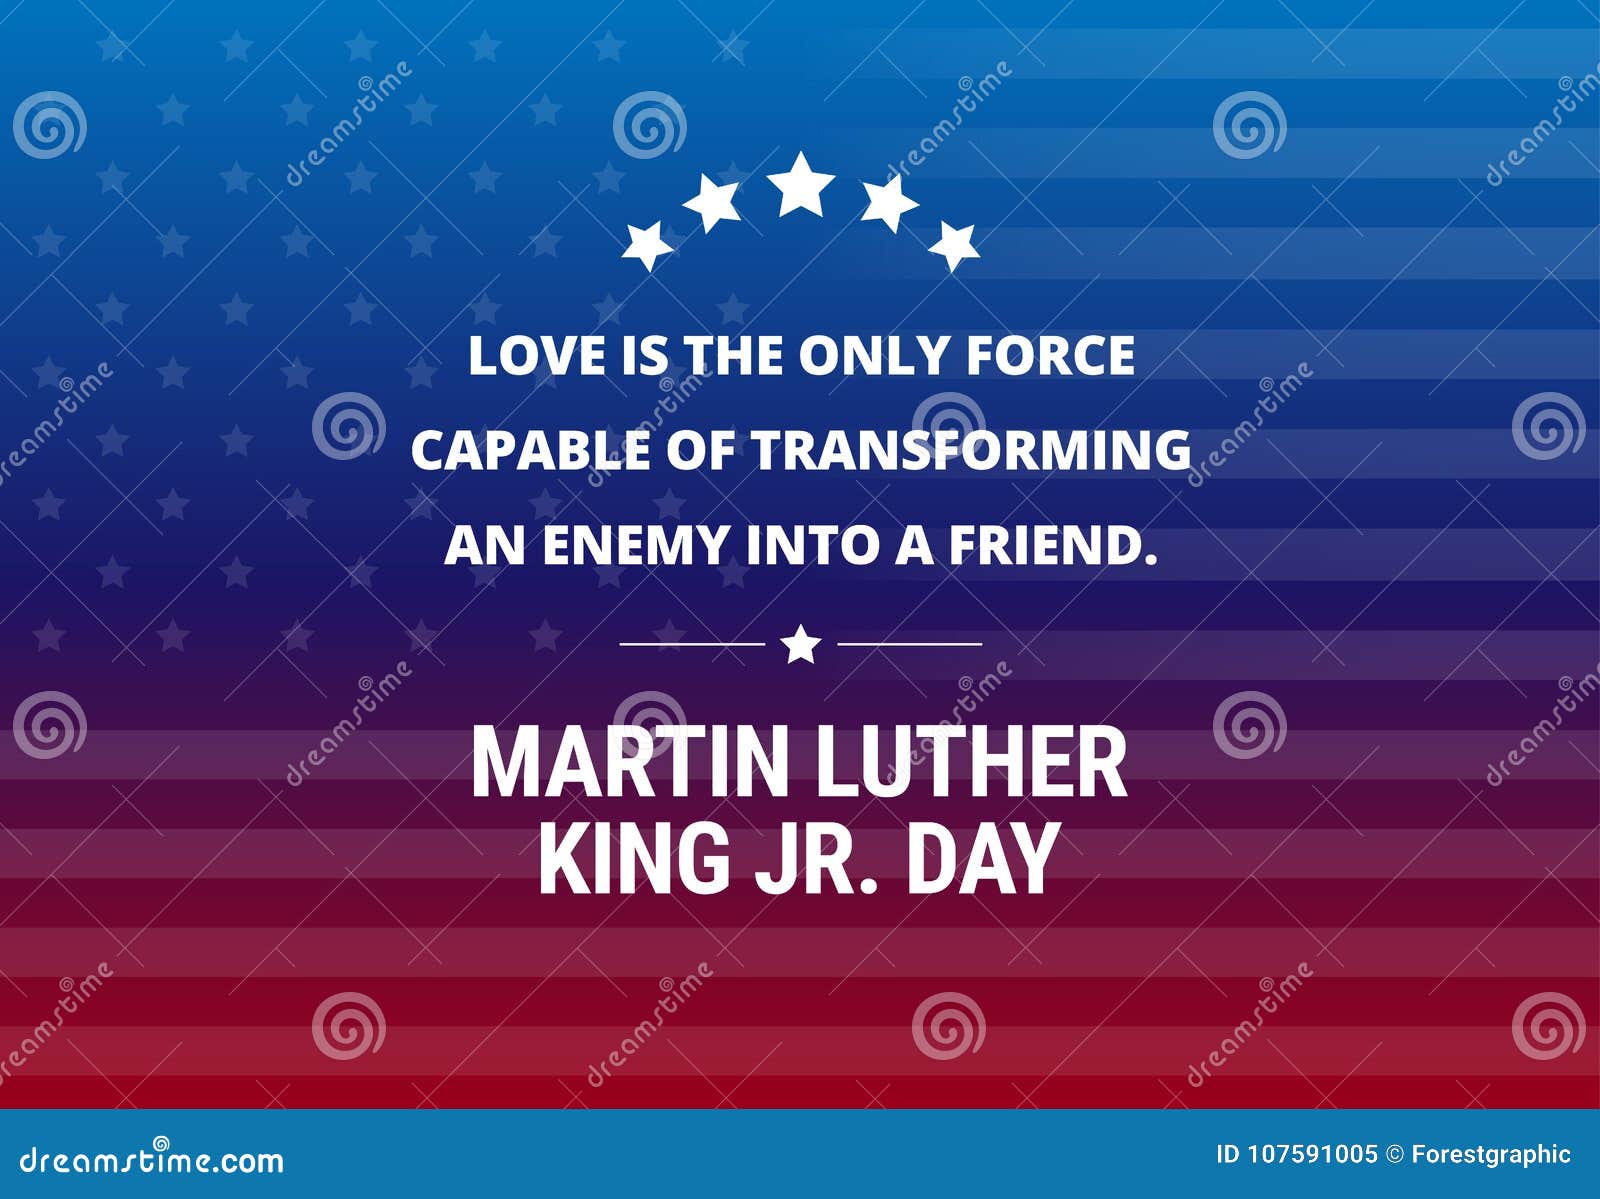 martin luther king jr day holiday  background - inspirational quote